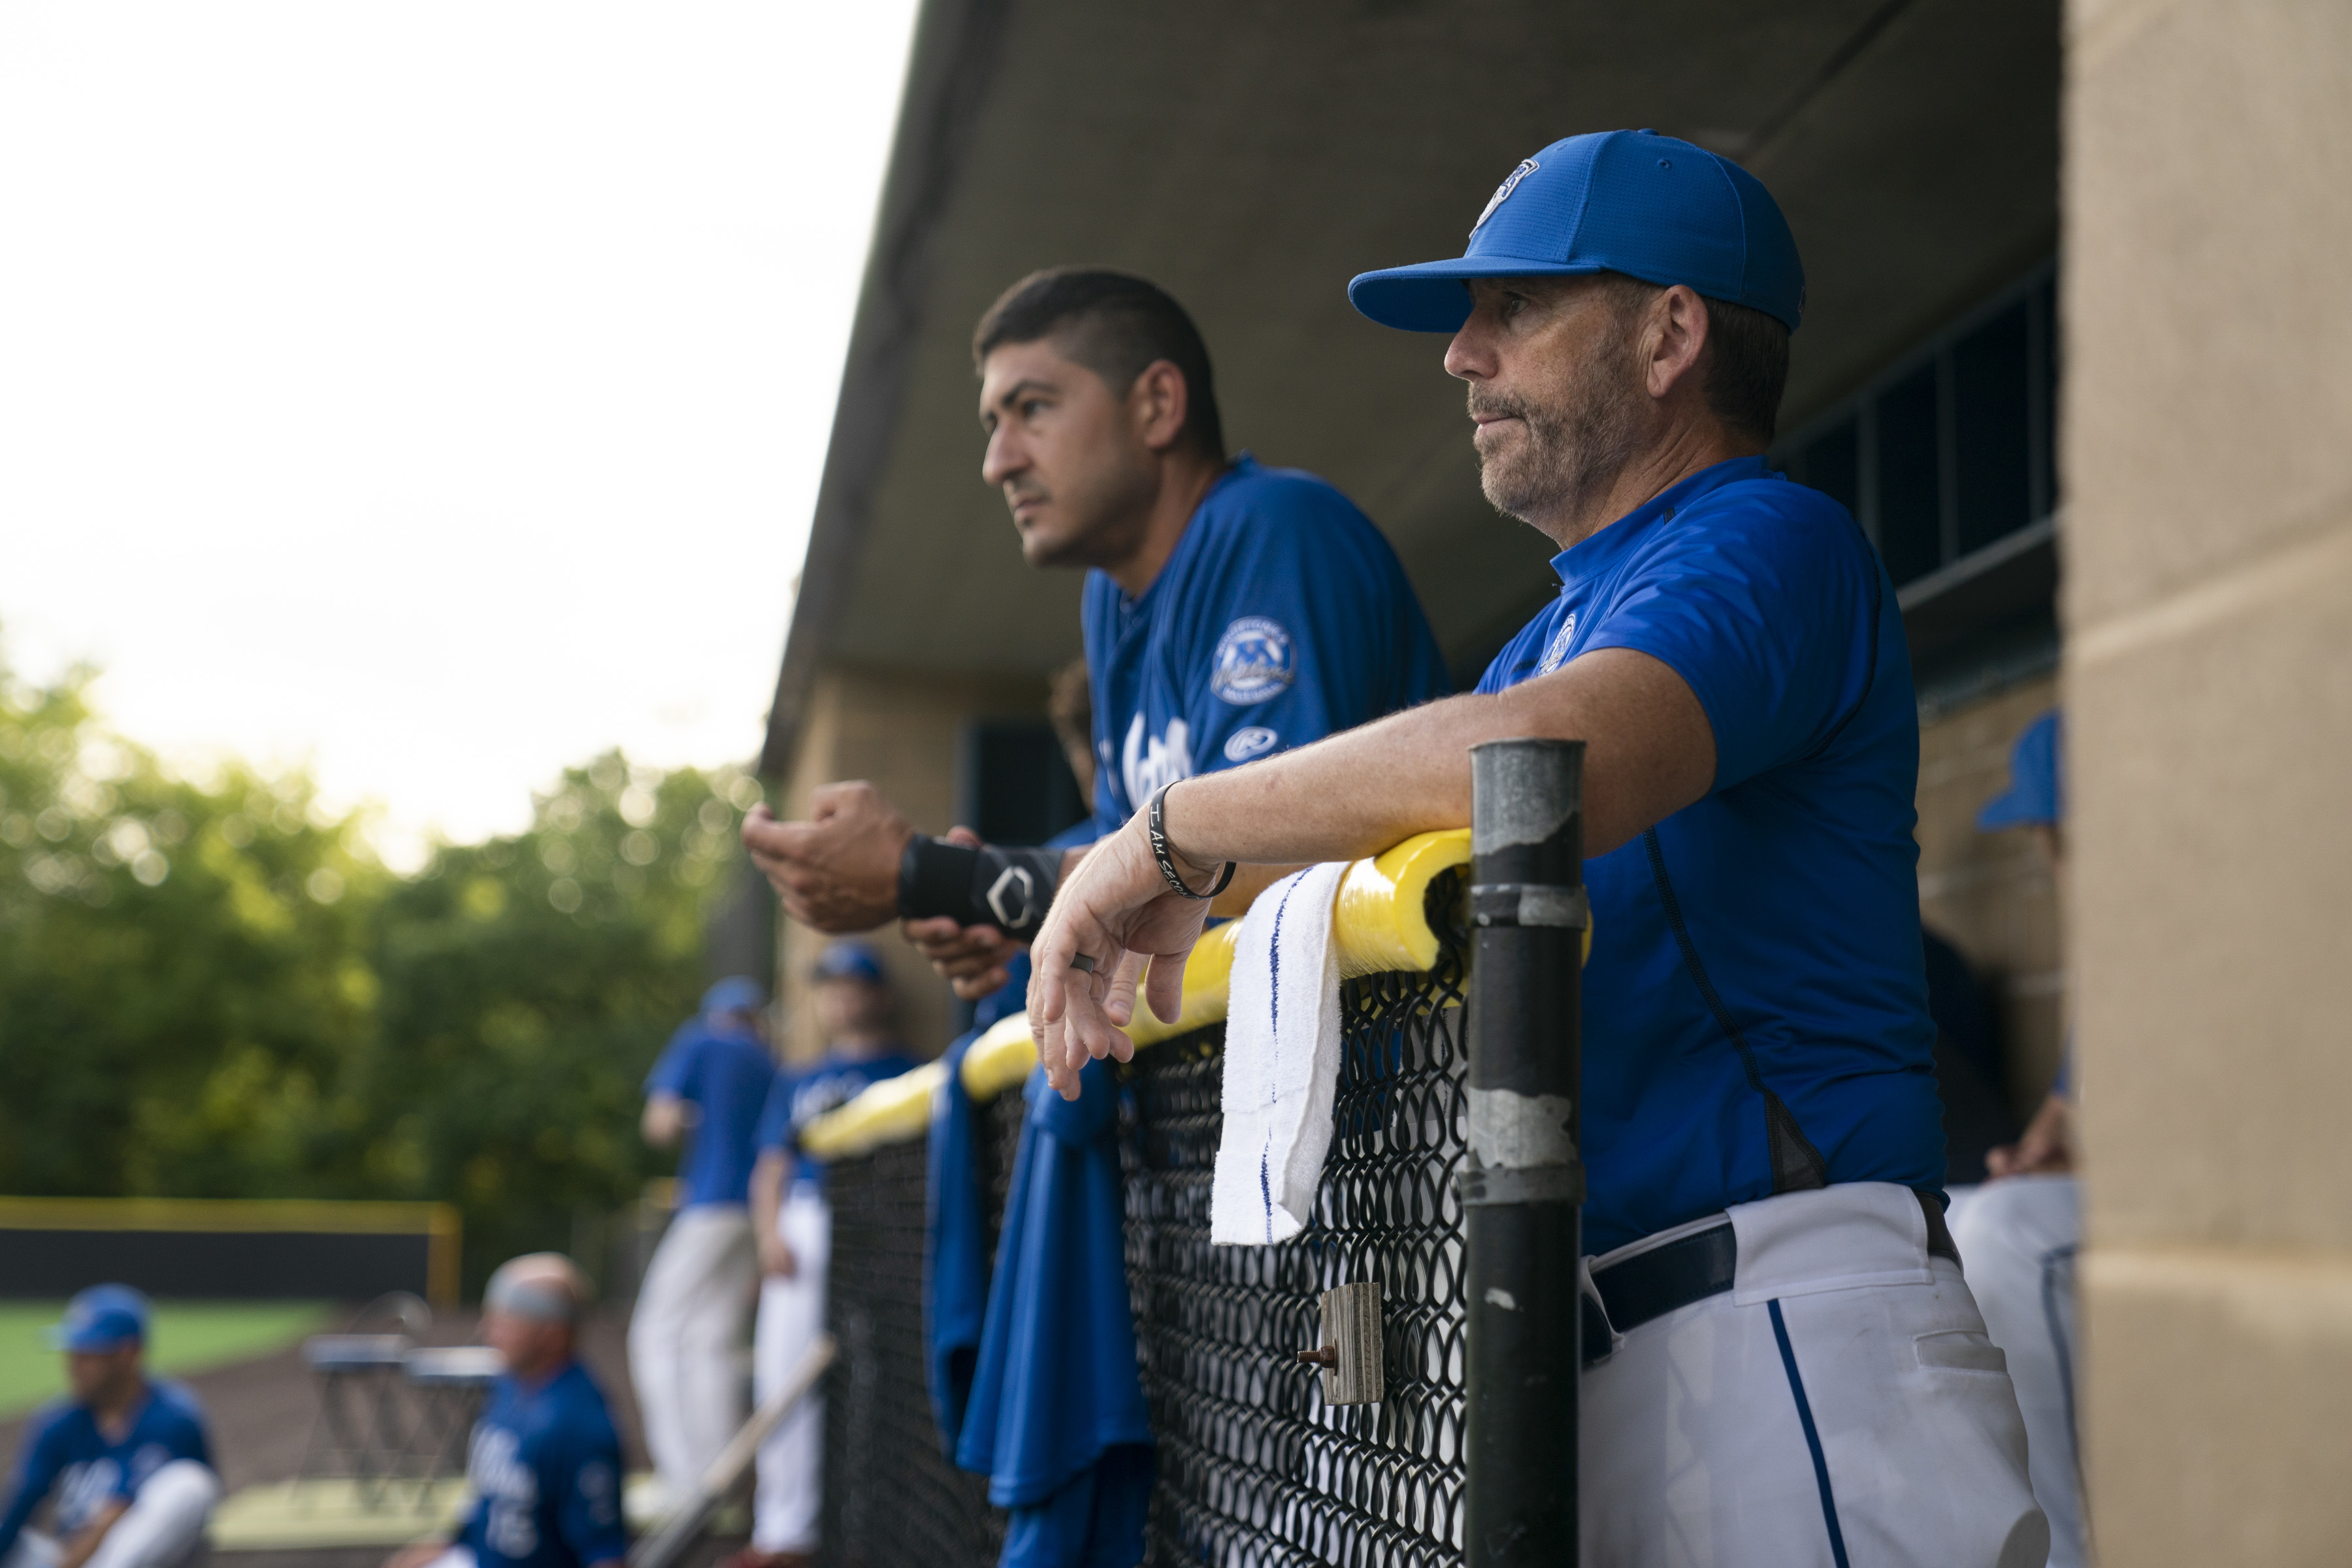 Minnetonka manager Kevin Hoy, right, eyed the pregame warmup with the Millers’ Joe Abellera.